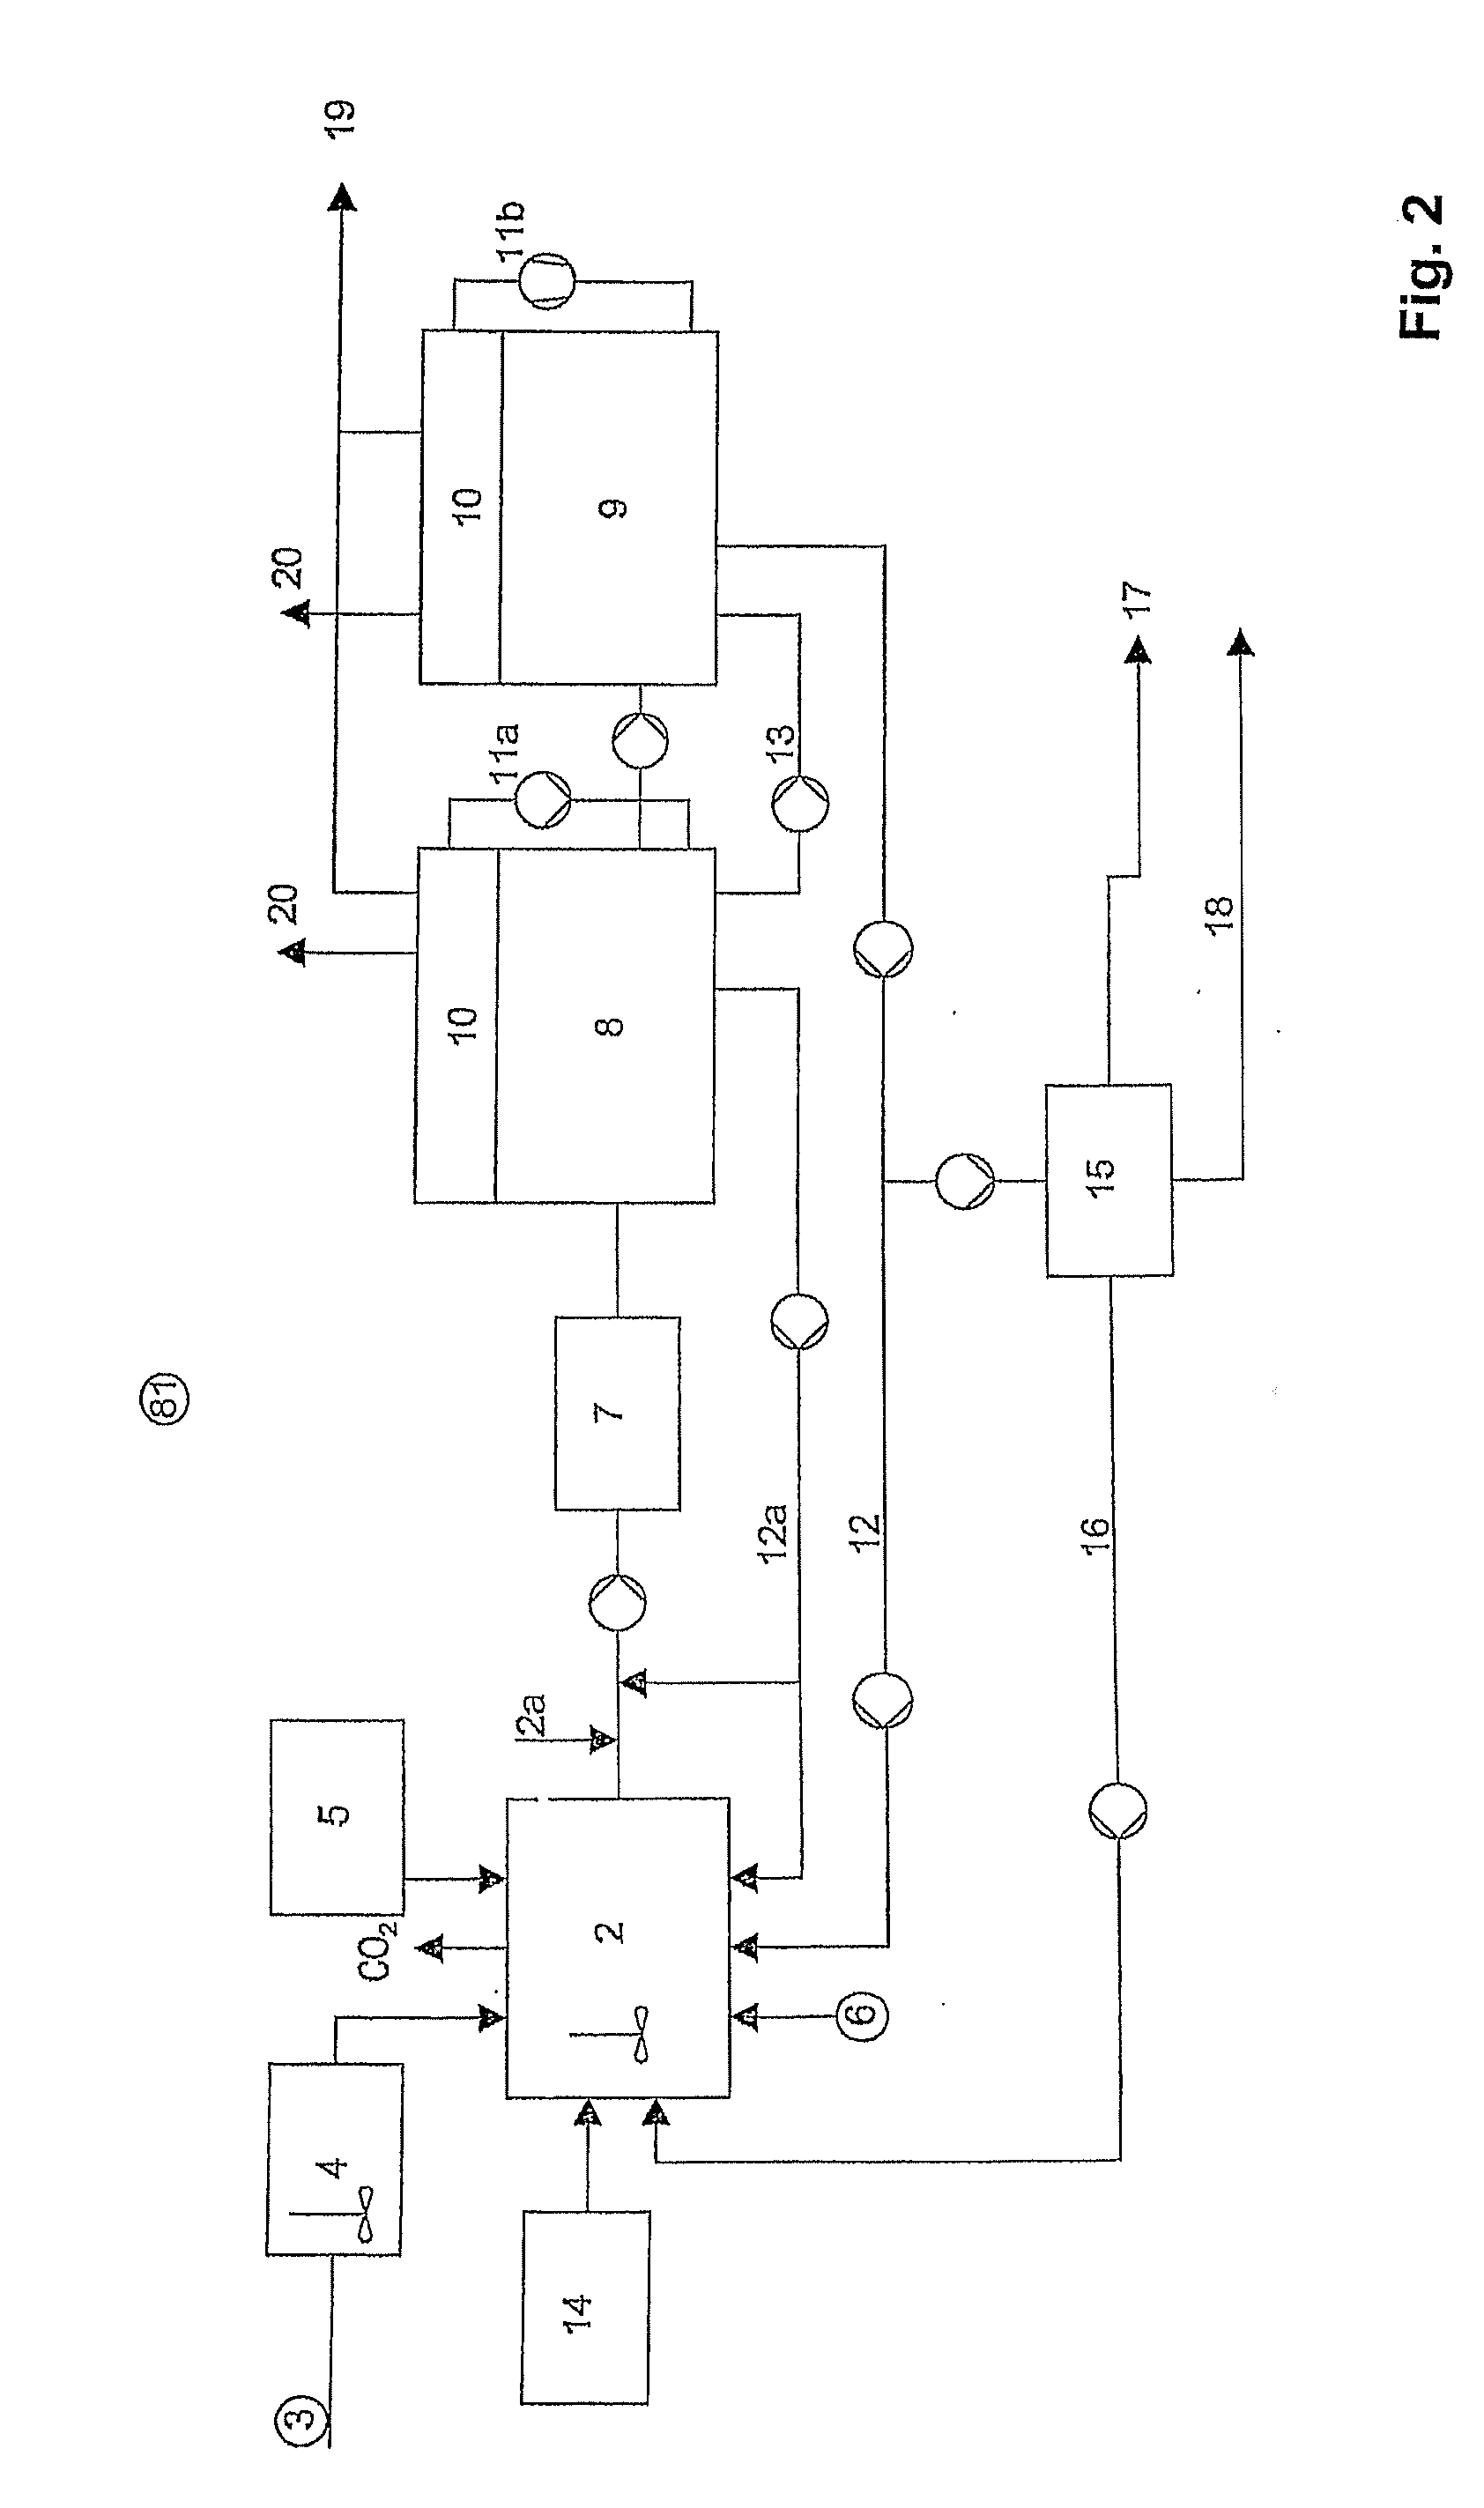 Process for producing methane from process water and biogenic material